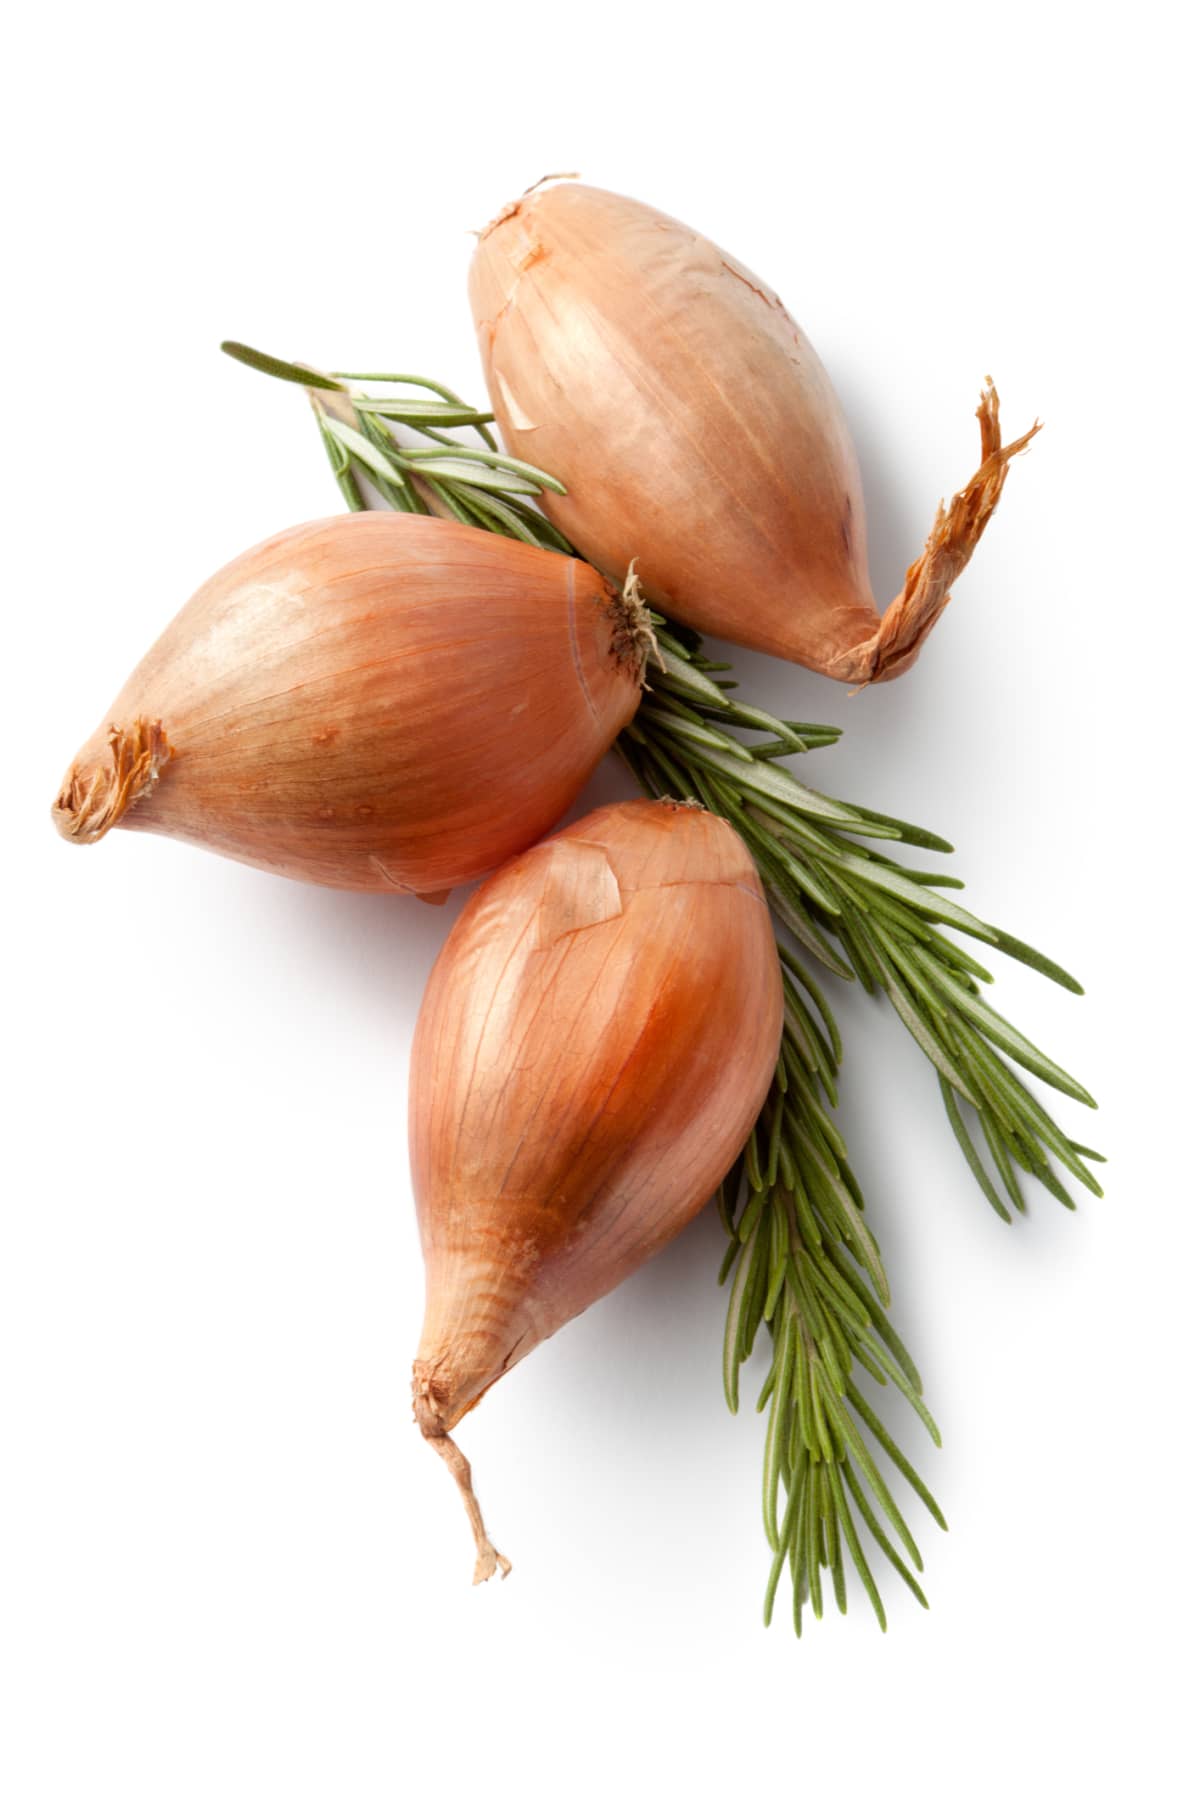 Flavouring: Shallots and Rosemary